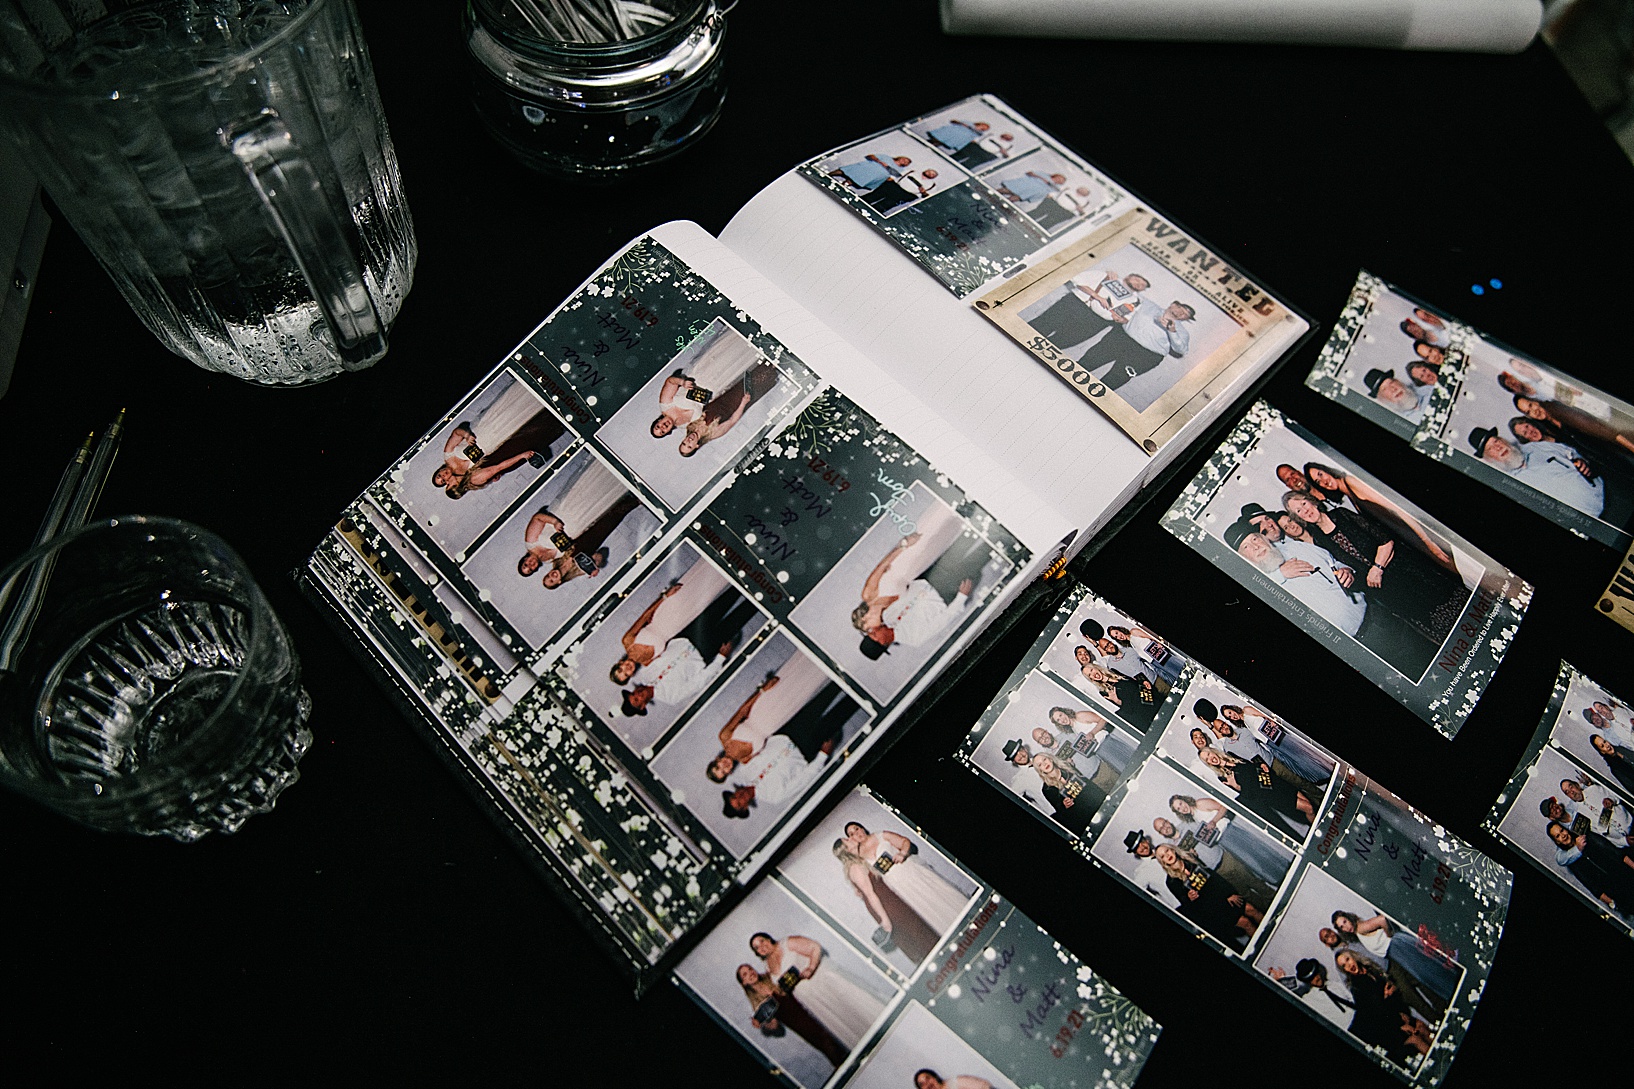 An image of a photo album guest book filled with photobooth photos of guests Dilucia's Banquet Hall during post wedding celebration